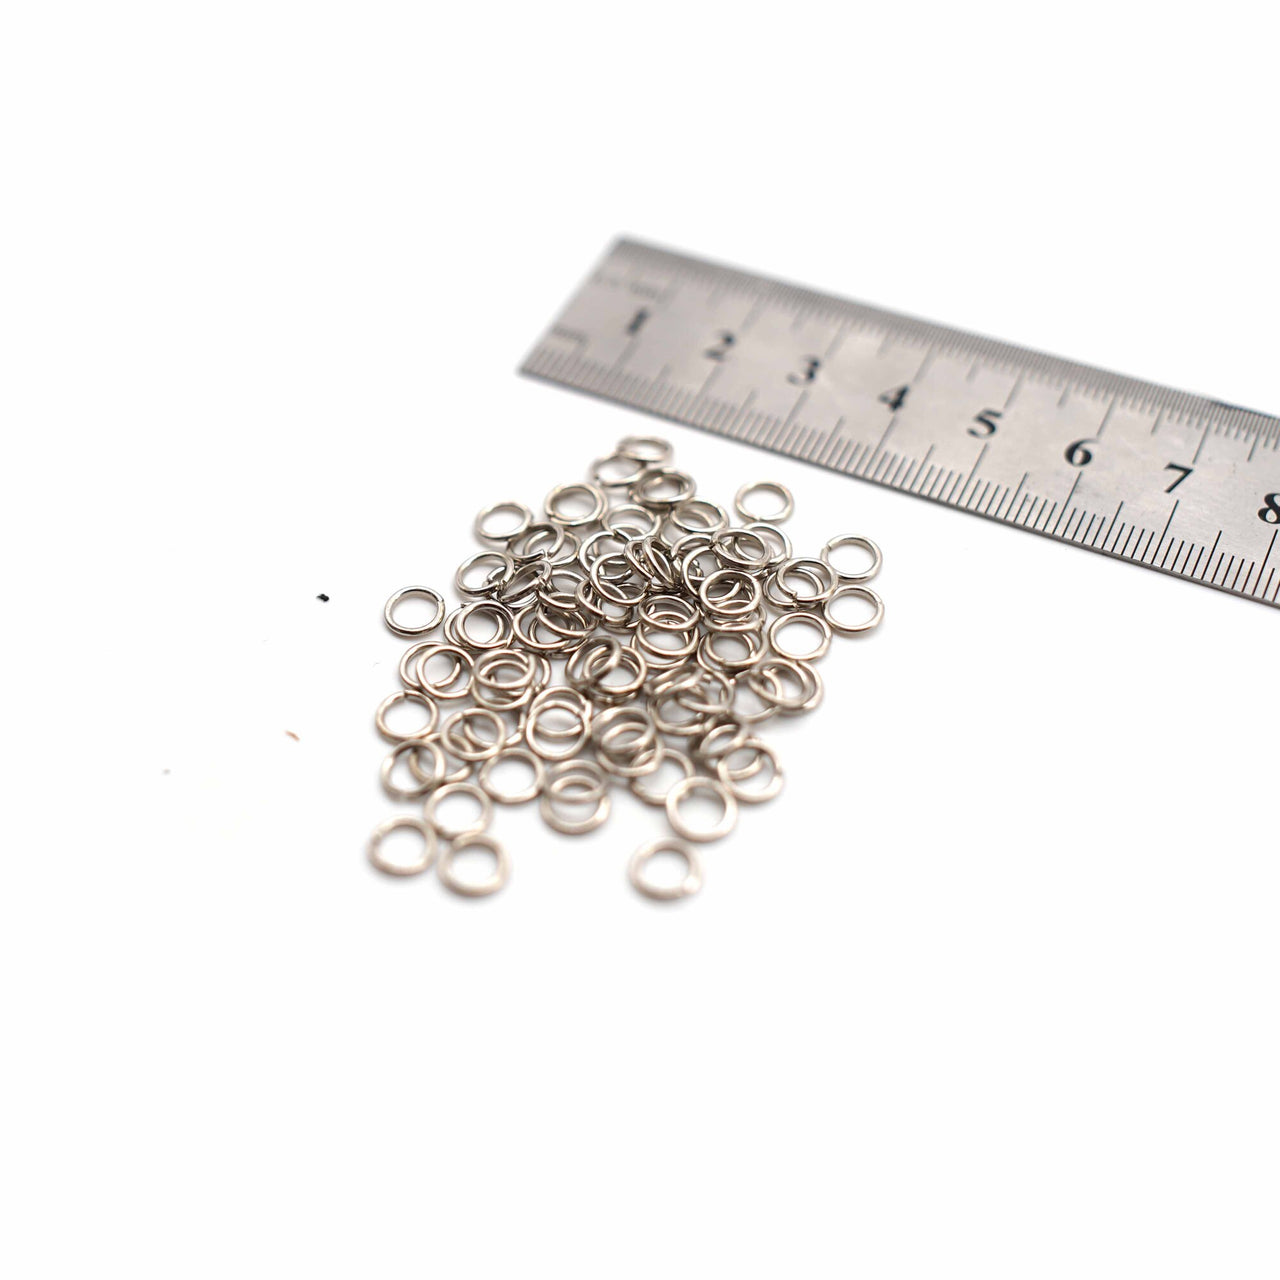 Jump Rings - 6mm - Silver - 50g (Approx. 550 Rings)